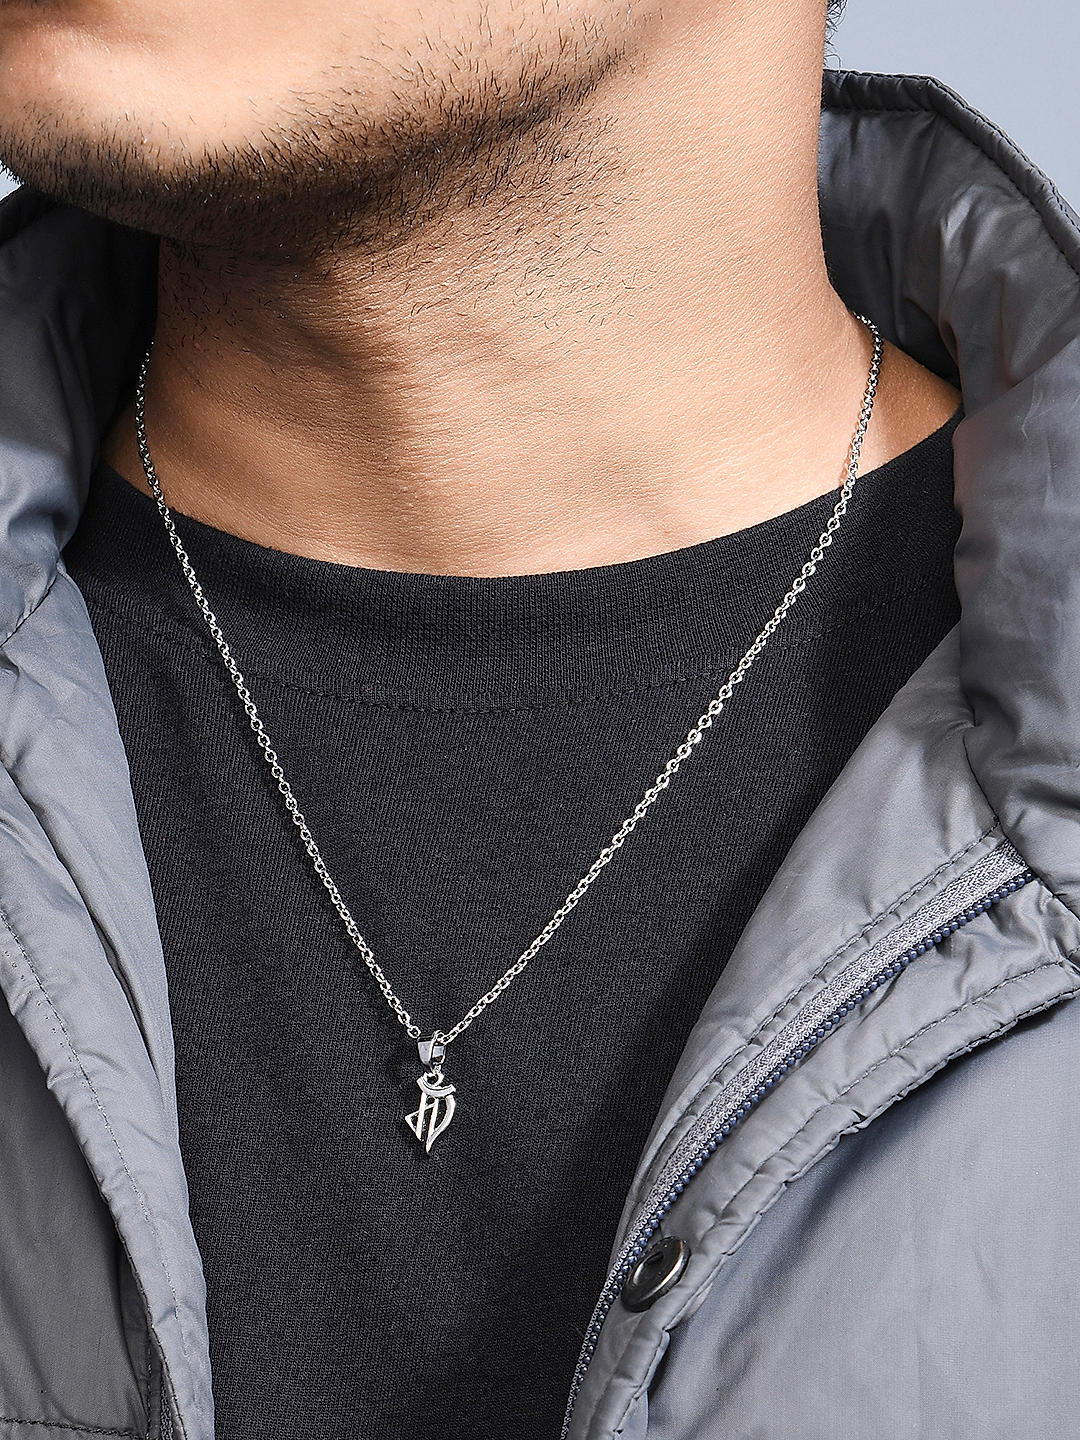 Layering Necklaces - The Ultimate Guide for Men